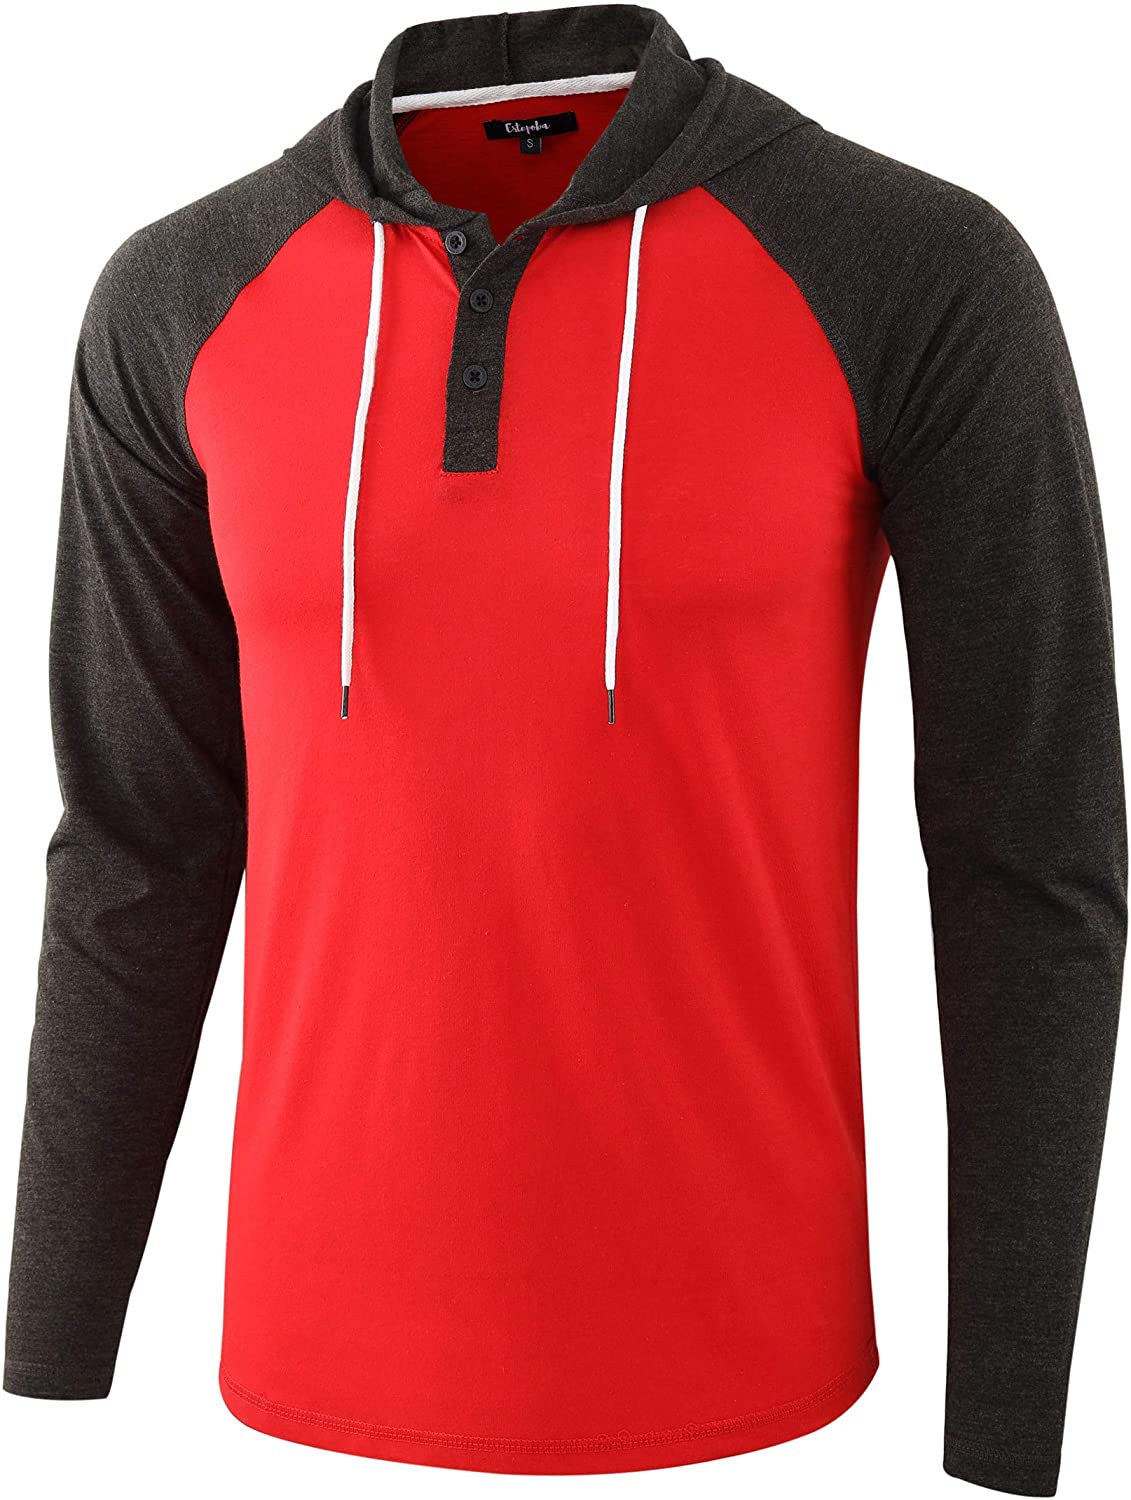 Estepoba Mens Casual Athletic Fit Lightweight Active Sports Jersey Shirt Hoodie 